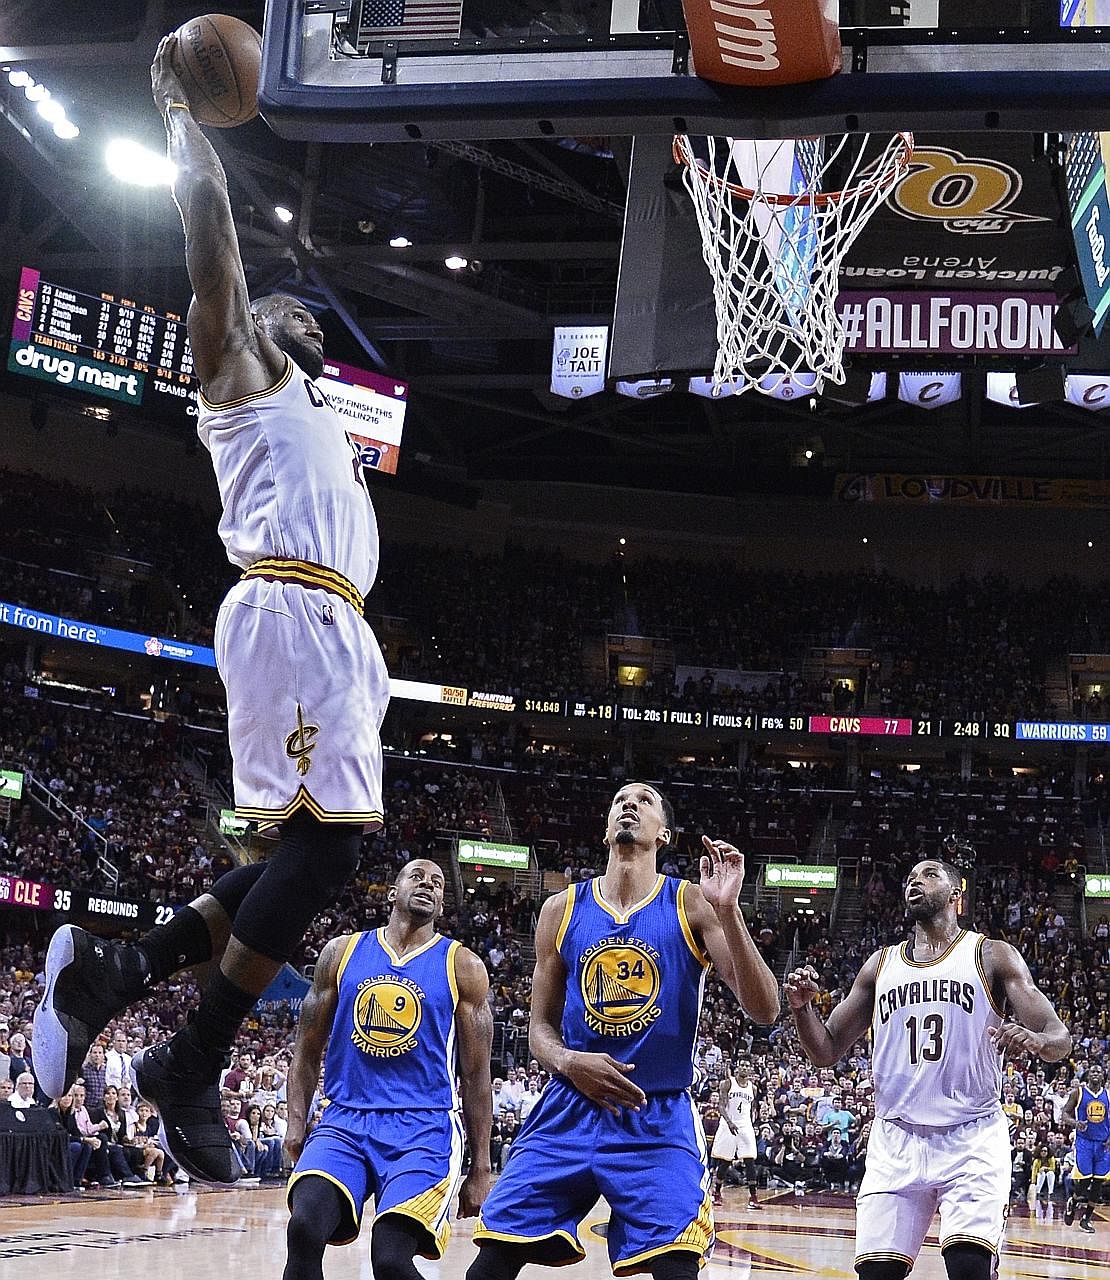 Cleveland's LeBron James dunks as Golden State's Andre Iguodala (centre) and Shaun Livingston look on. James set the tone for a 120-90 win to cut the Warriors' lead in the Finals to 2-1.